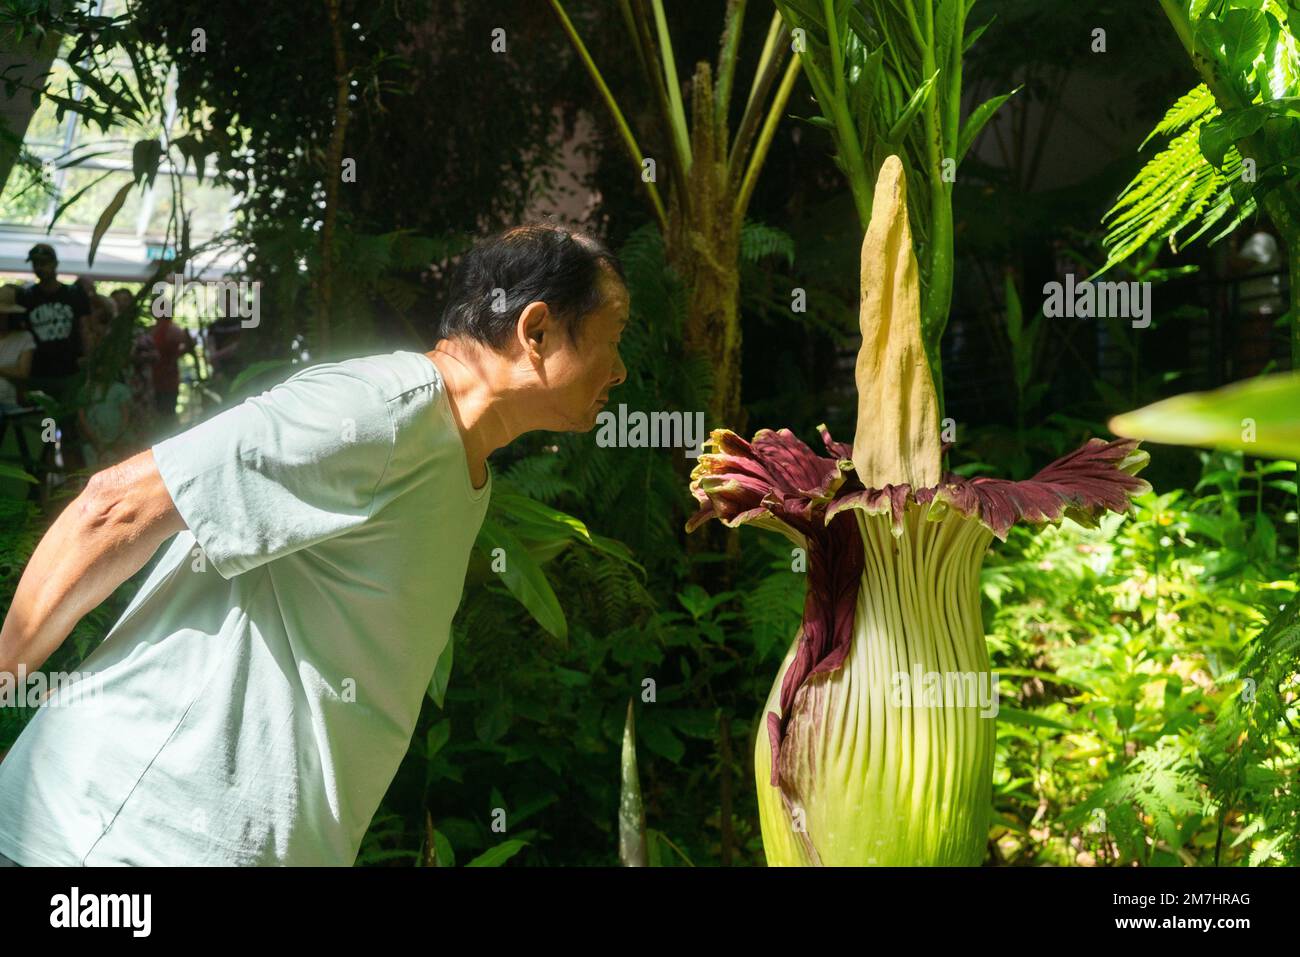 Adelaide, Australia. 10 January 2023 . The (Tiran Arum)  commonly known as the corpse flower  for its strong smell of a rotting corpse with which it usually attracts insects for its pollination has bloomed at the Adelaide Botanic Gardens  attracting many visitors. It is the first time that the endangered flower has blossomed in nearly 10 years, and it is expected to take another three to five years before it  blooms again.   Credit: amer ghazzal/Alamy Live News Stock Photo